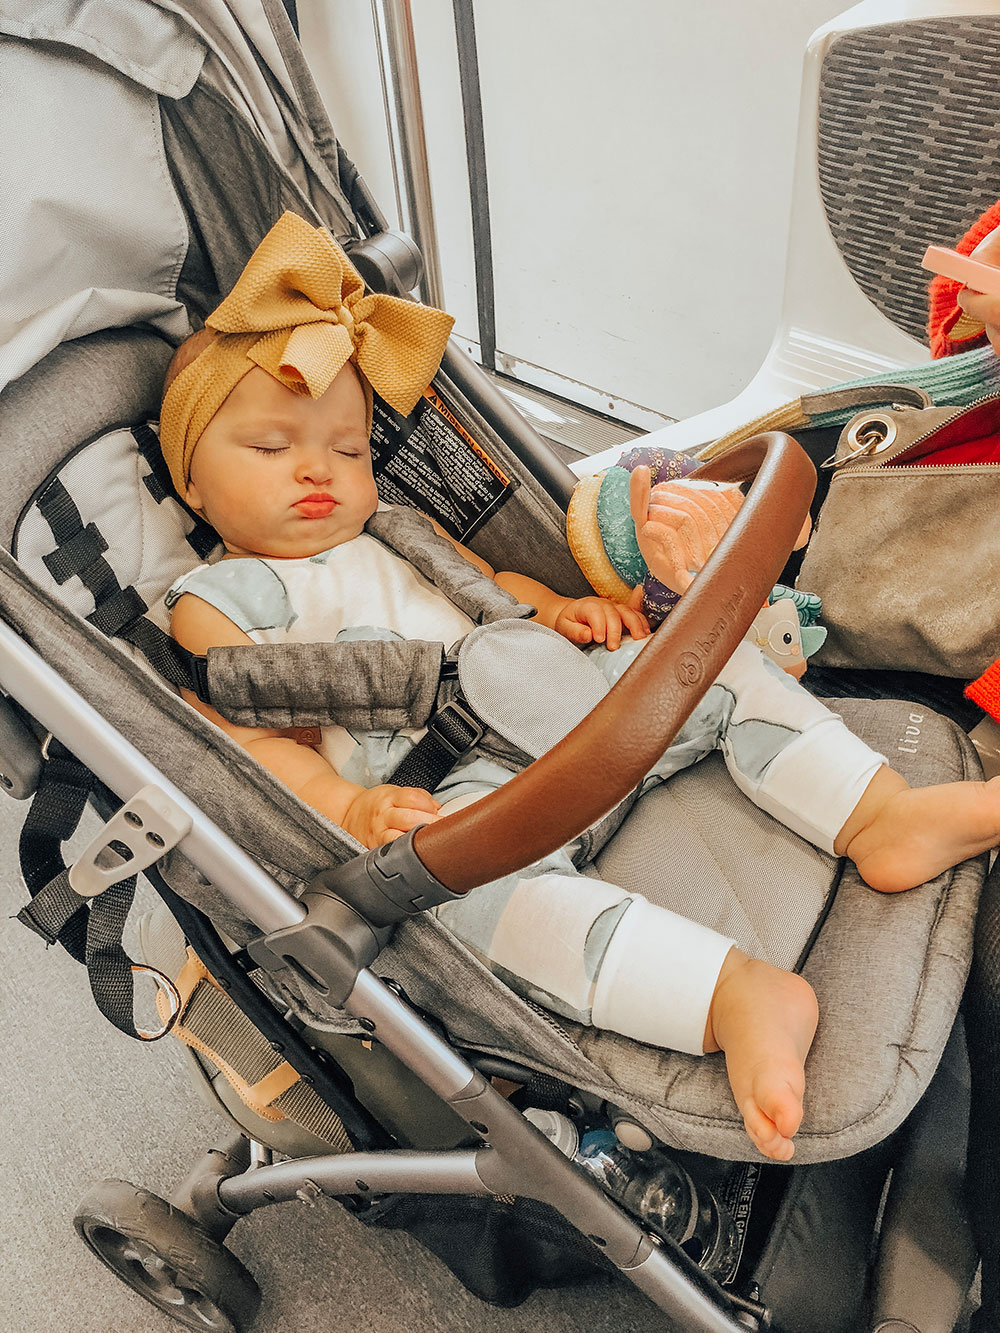 traveling with baby tips